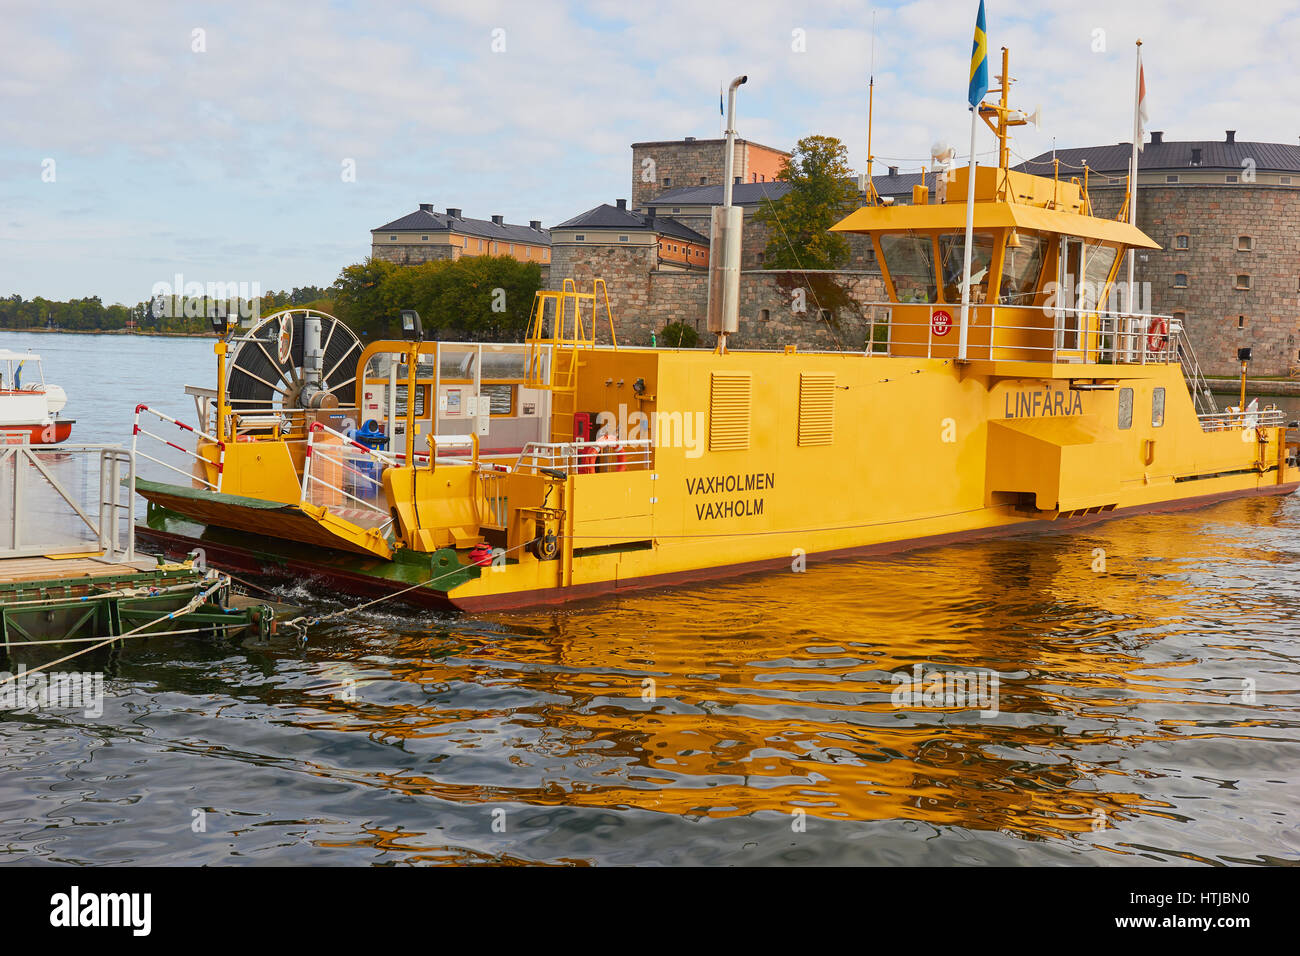 Cable ferry linking Vaxholm to Vaxholm Fortress island, Sweden, Scandinavia Stock Photo